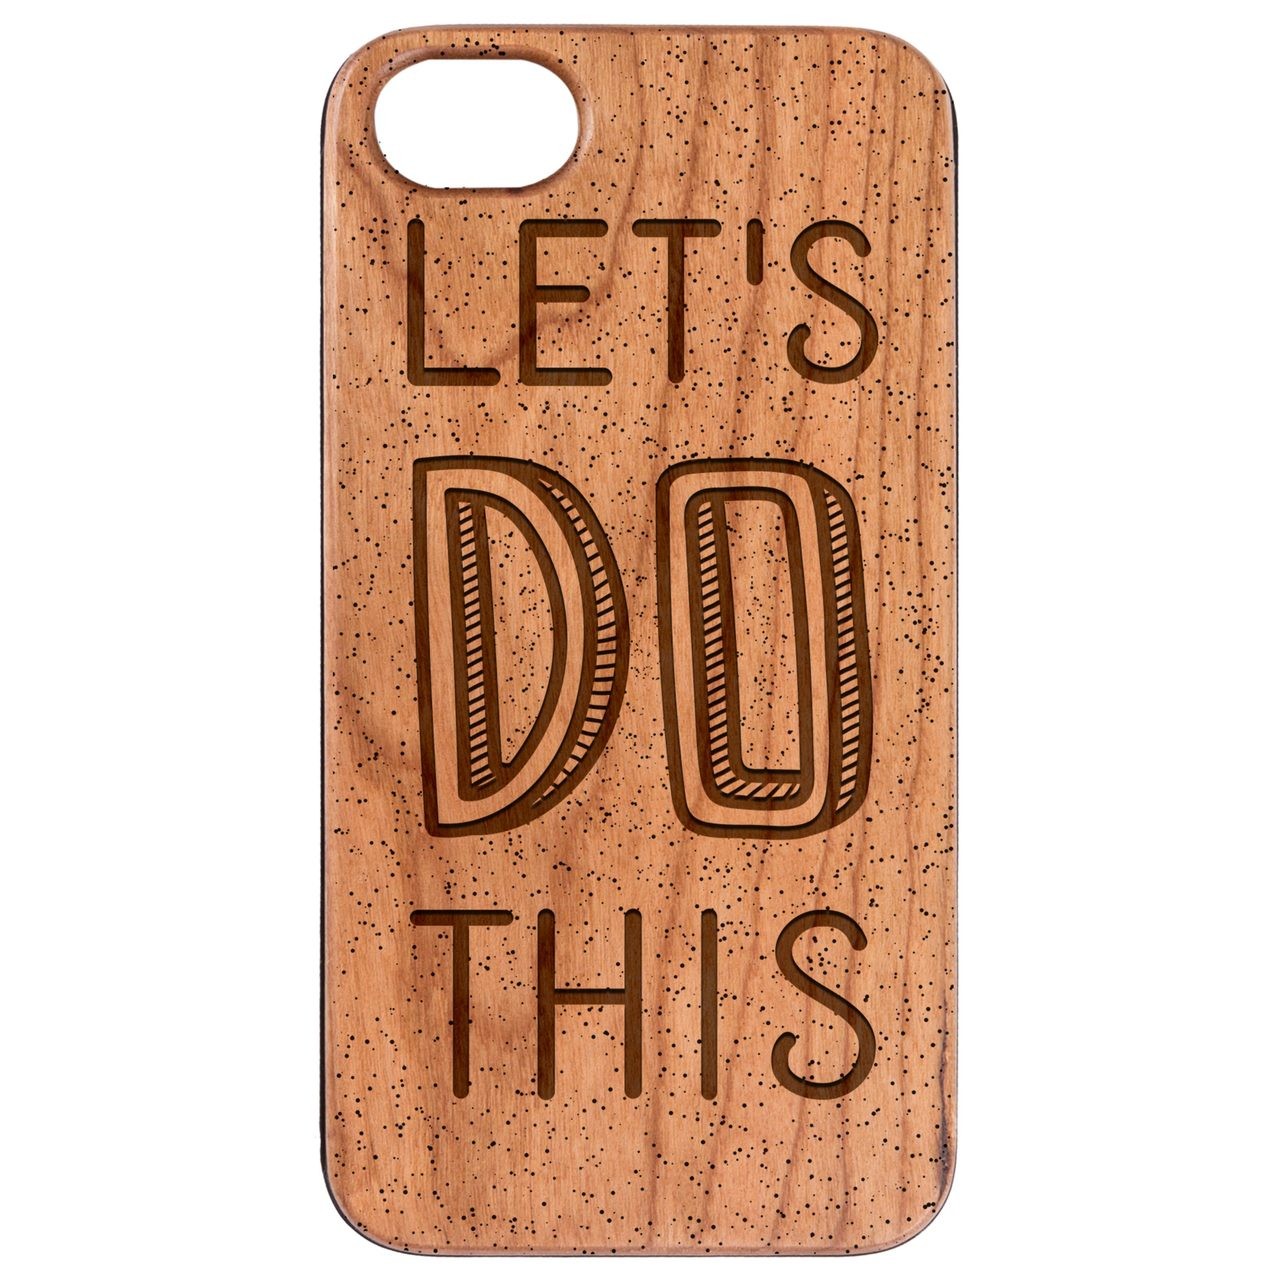  Lets Do This - Engraved - Wooden Phone Case - IPhone 13 Models